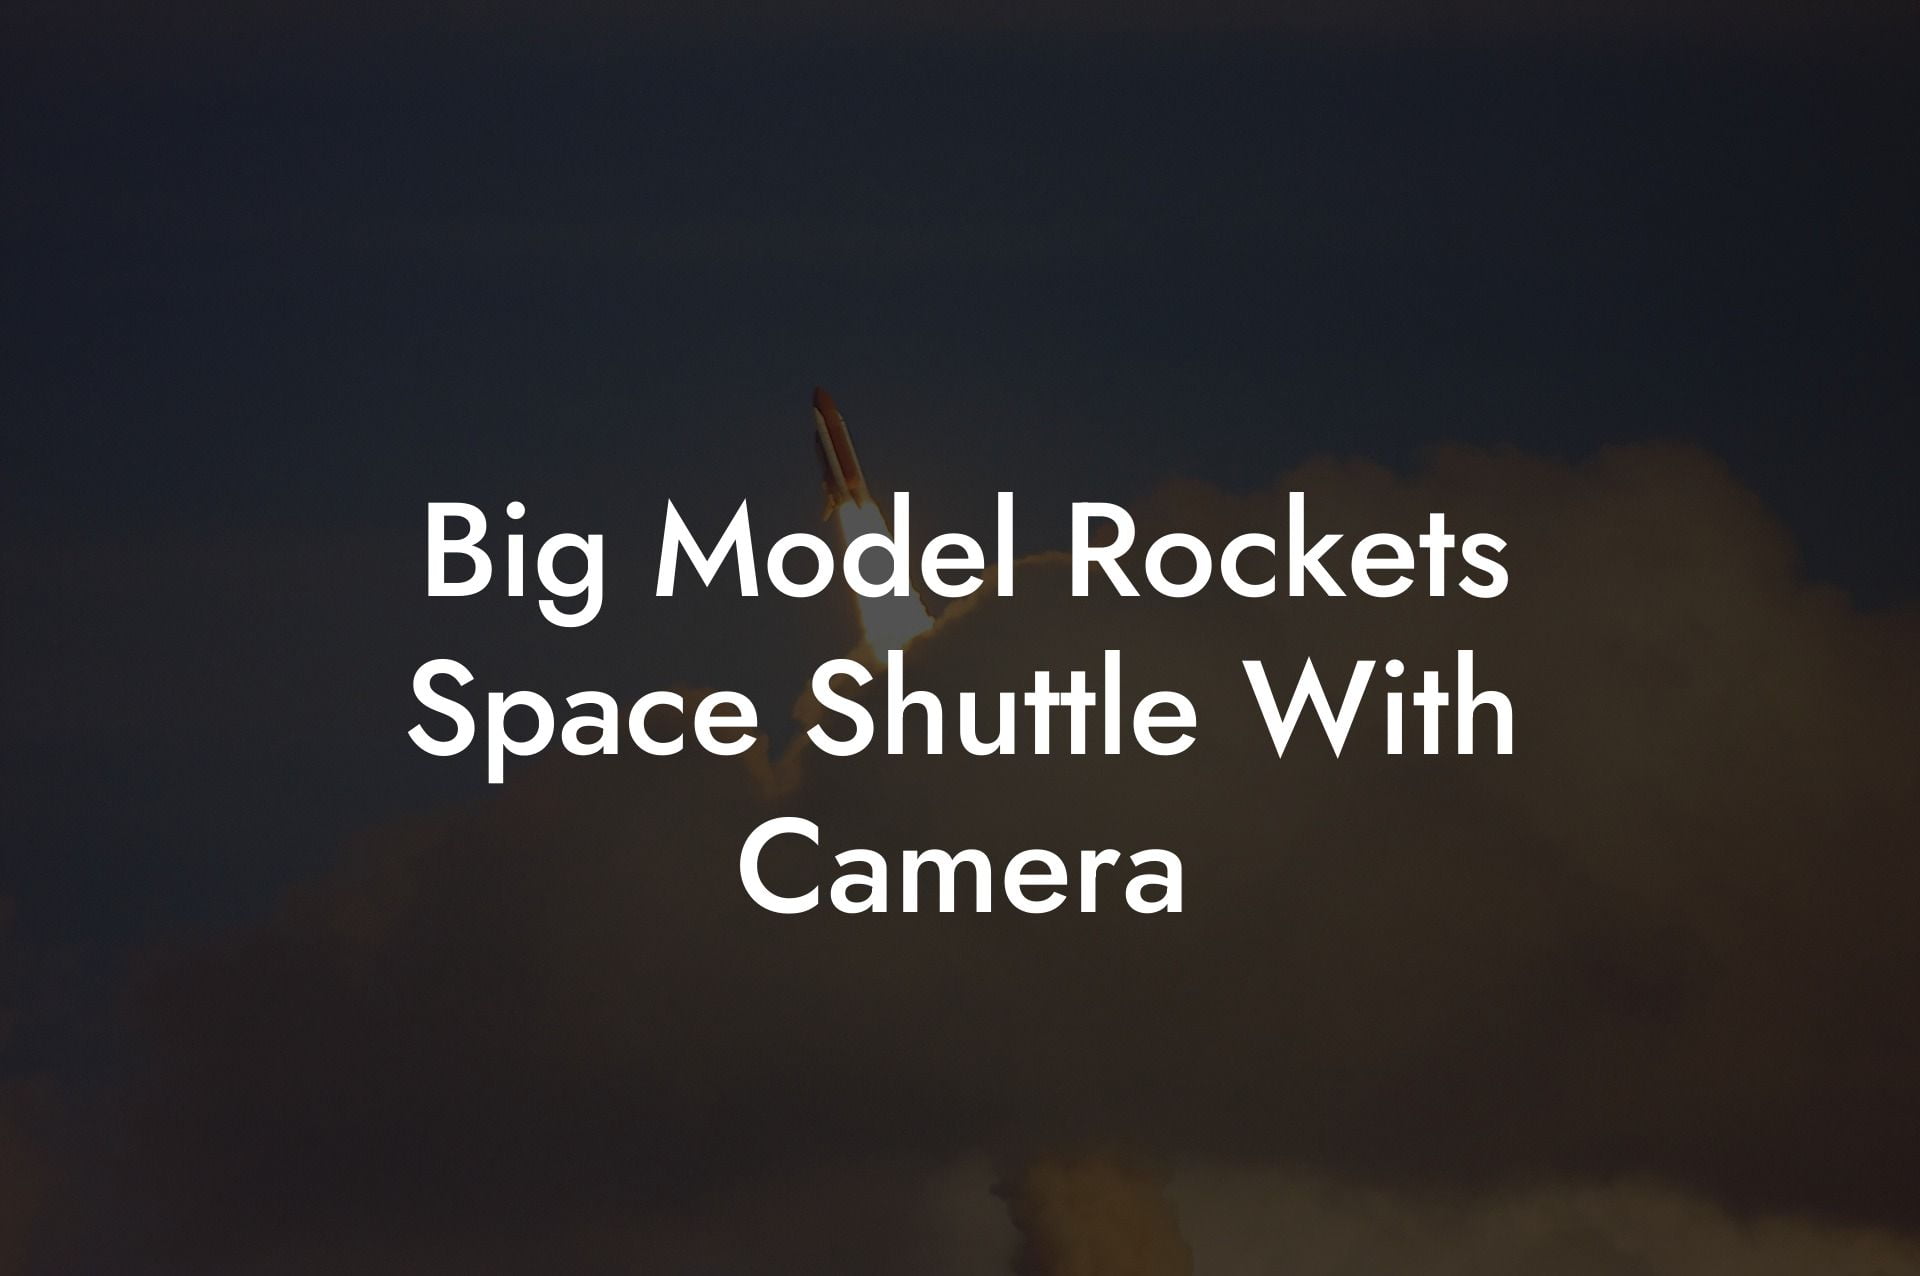 Big Model Rockets Space Shuttle With Camera